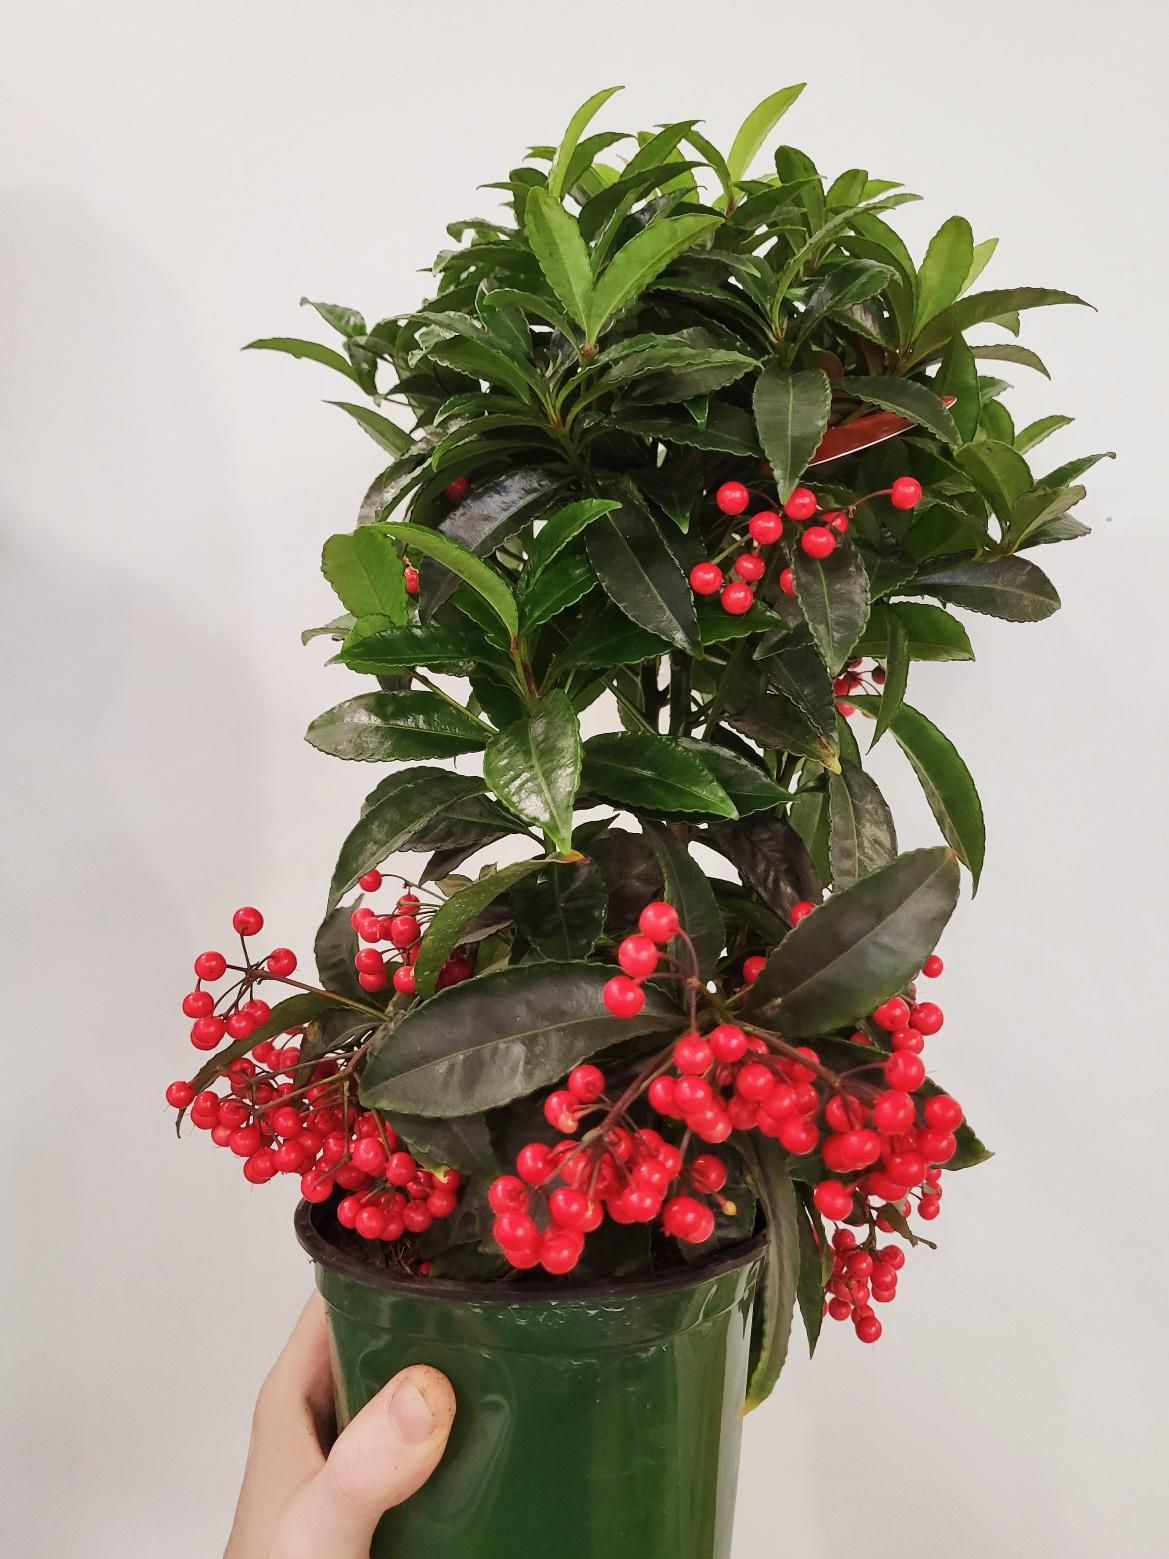 Ardisia crenata - Christmas Berry/Coral Berry Wild Willy's and Flowers